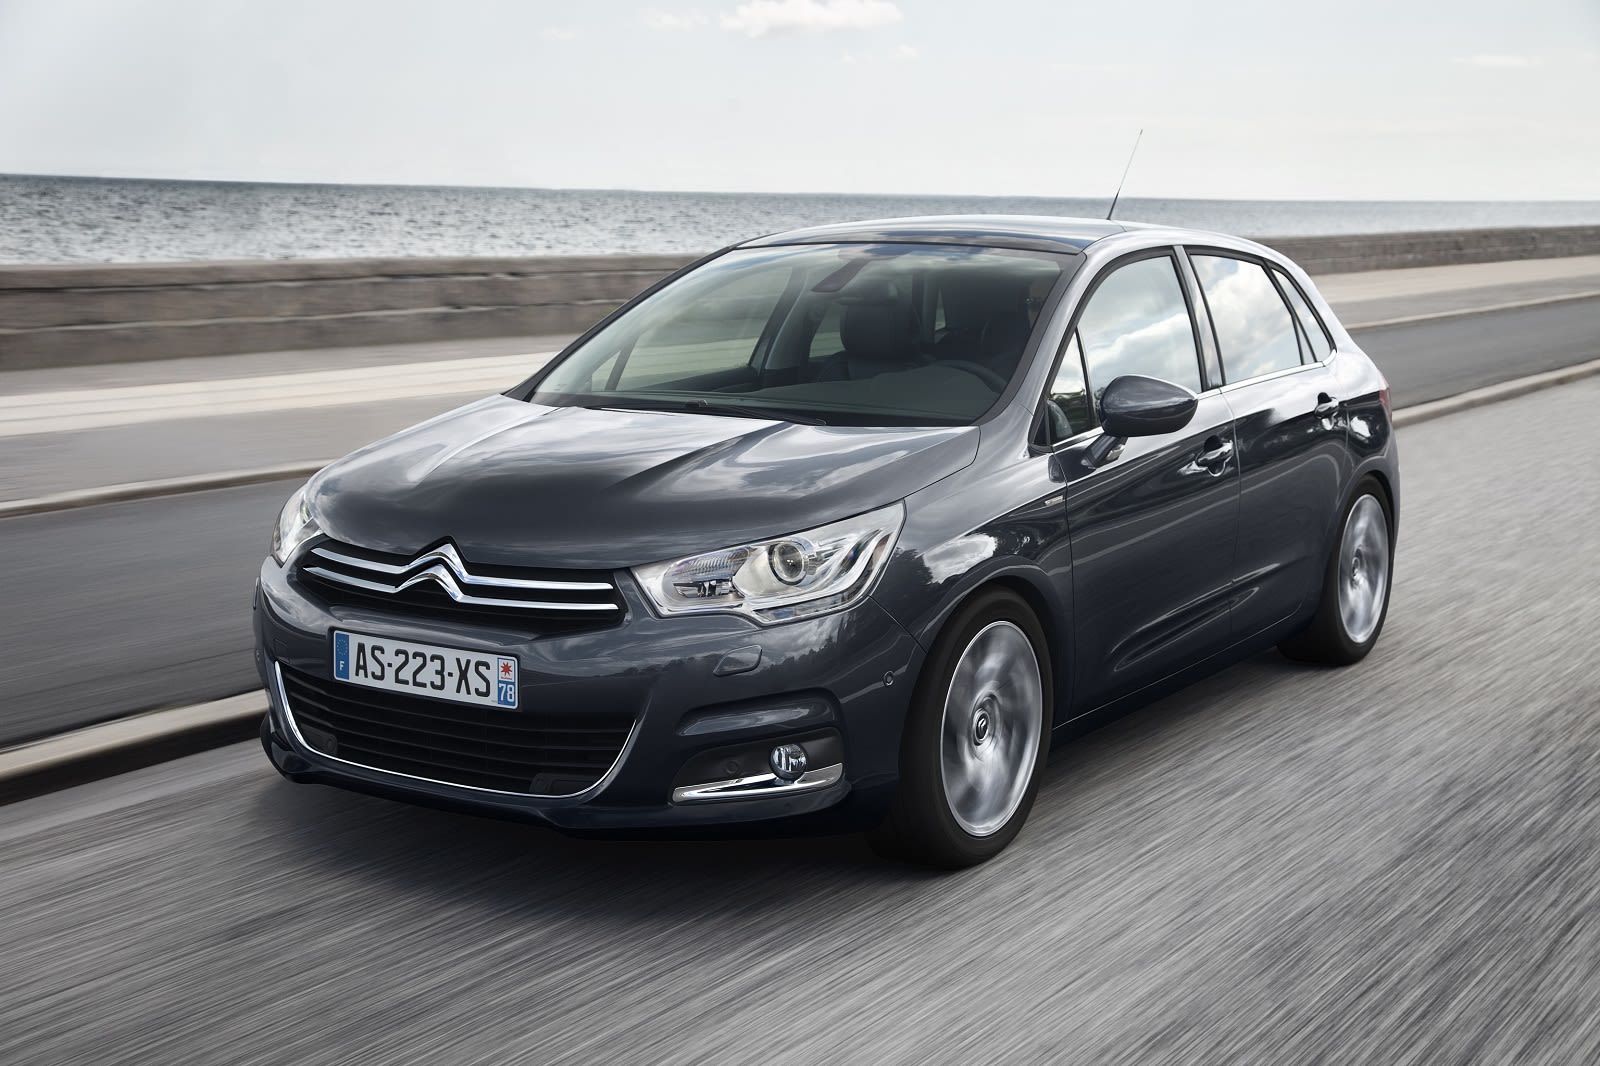 Illustration for article titled Citroën is morphing the C4 into some sort of crossover